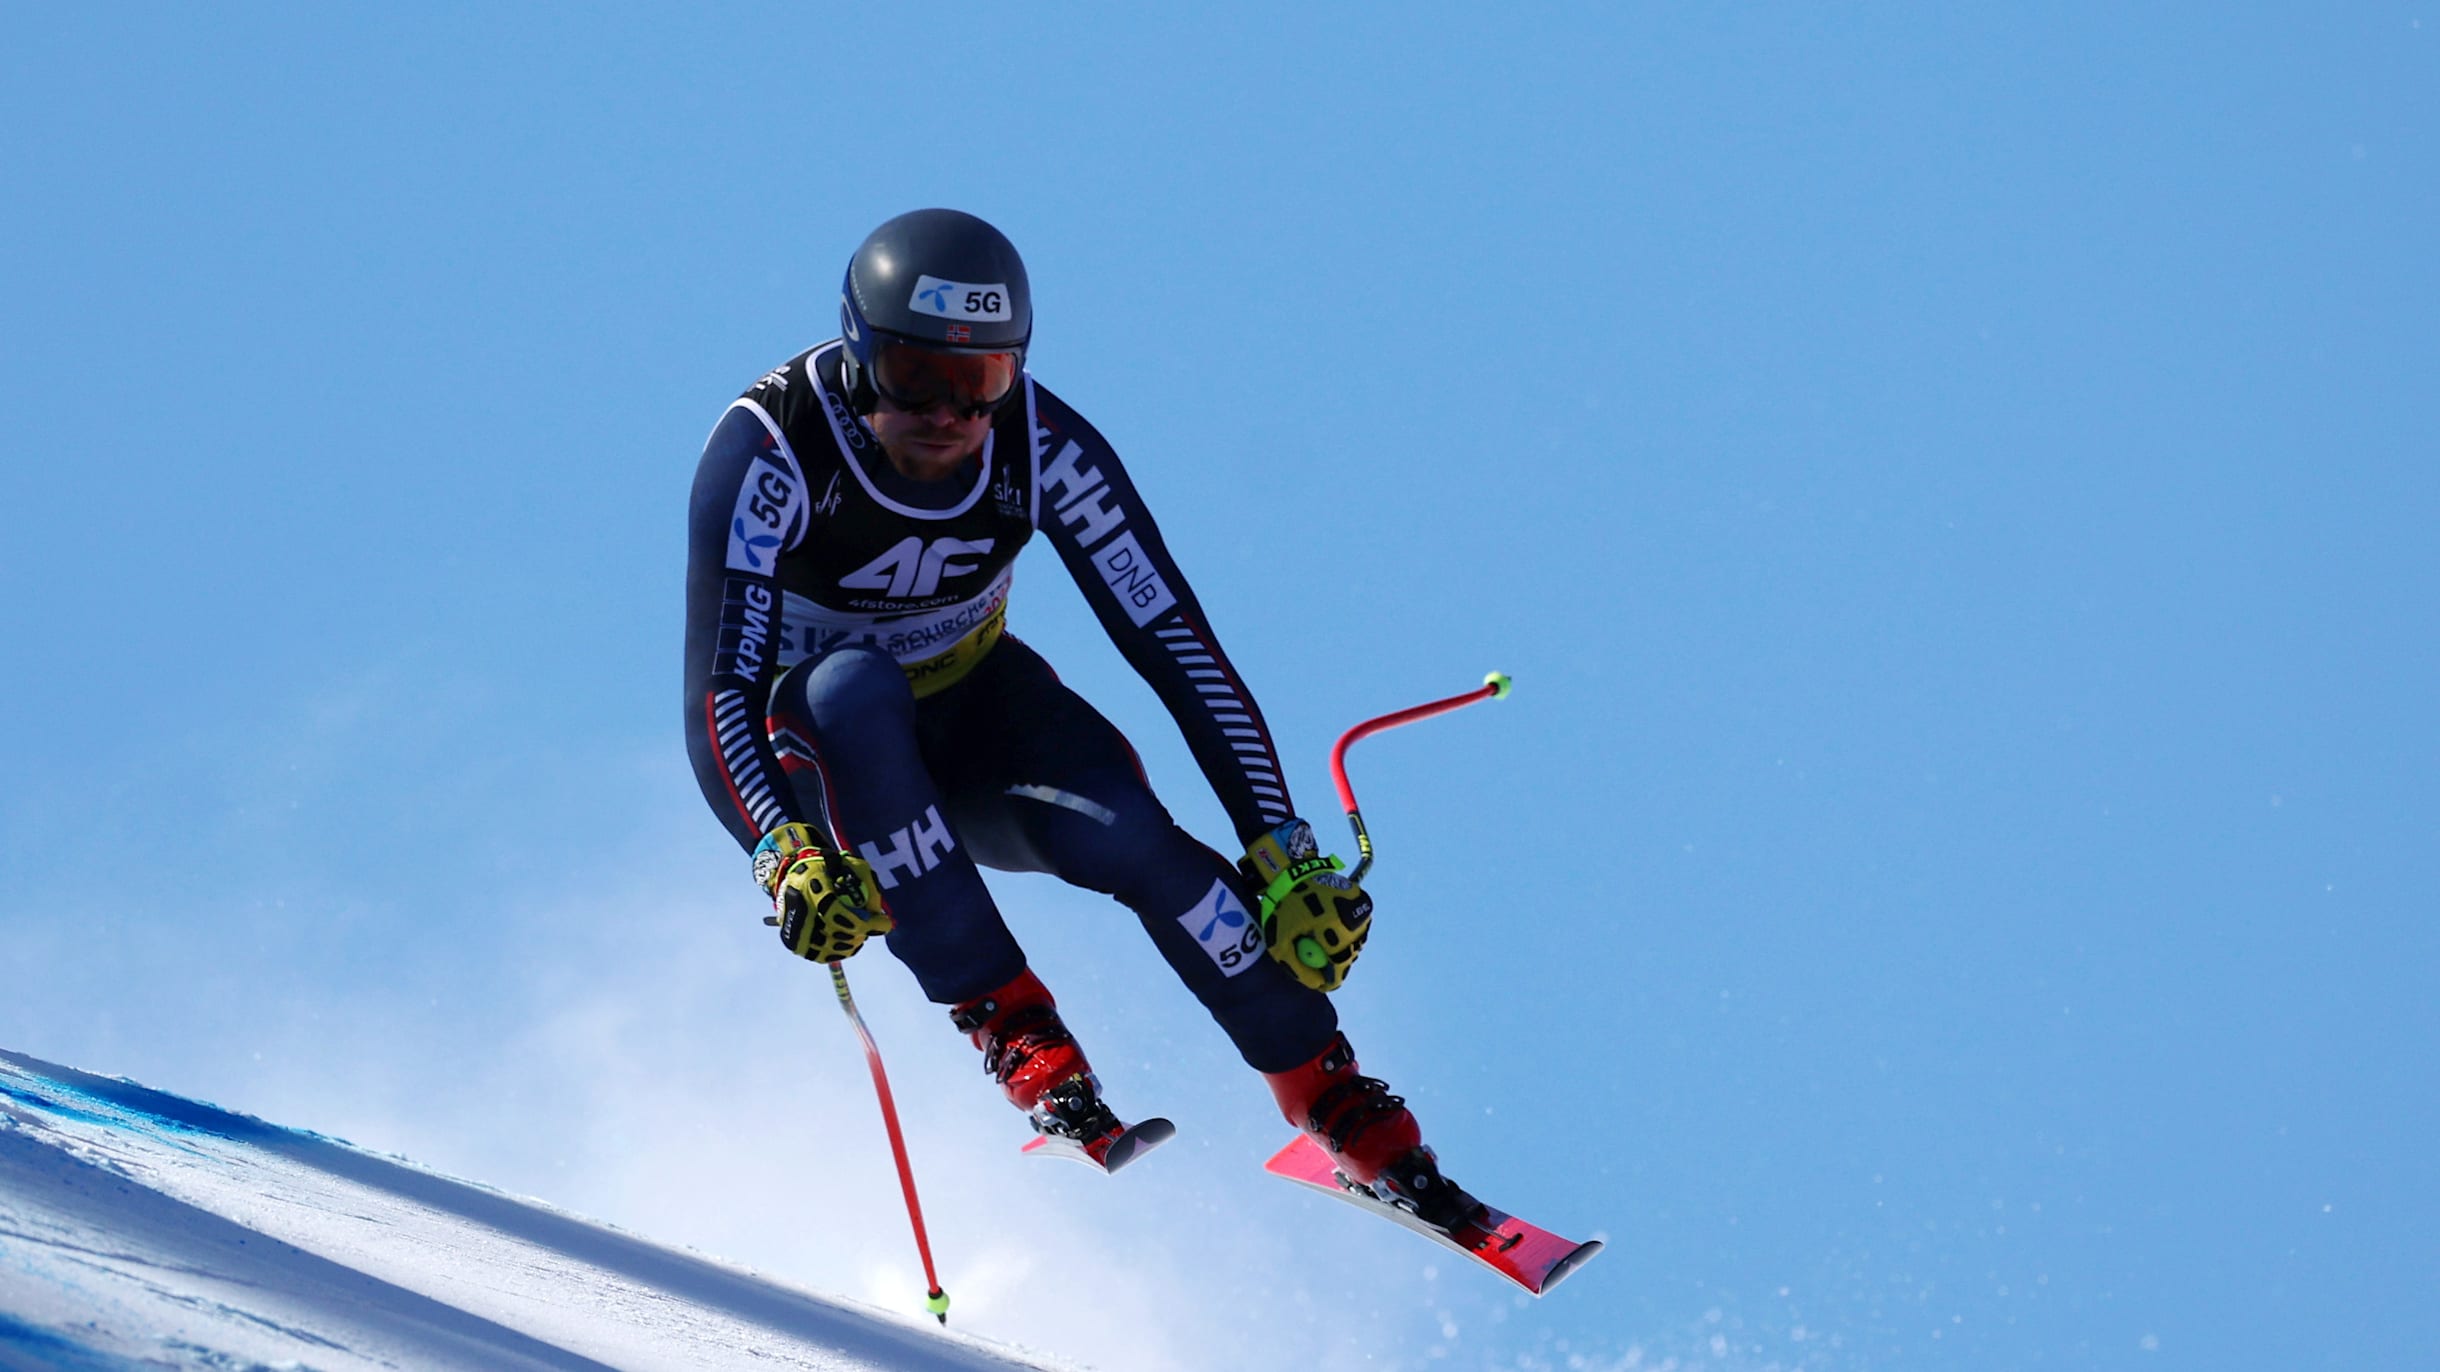 Live streaming, mens downhill at 2023 FIS Alpine Ski World Championships on 12 February Preview, schedule and how to watch